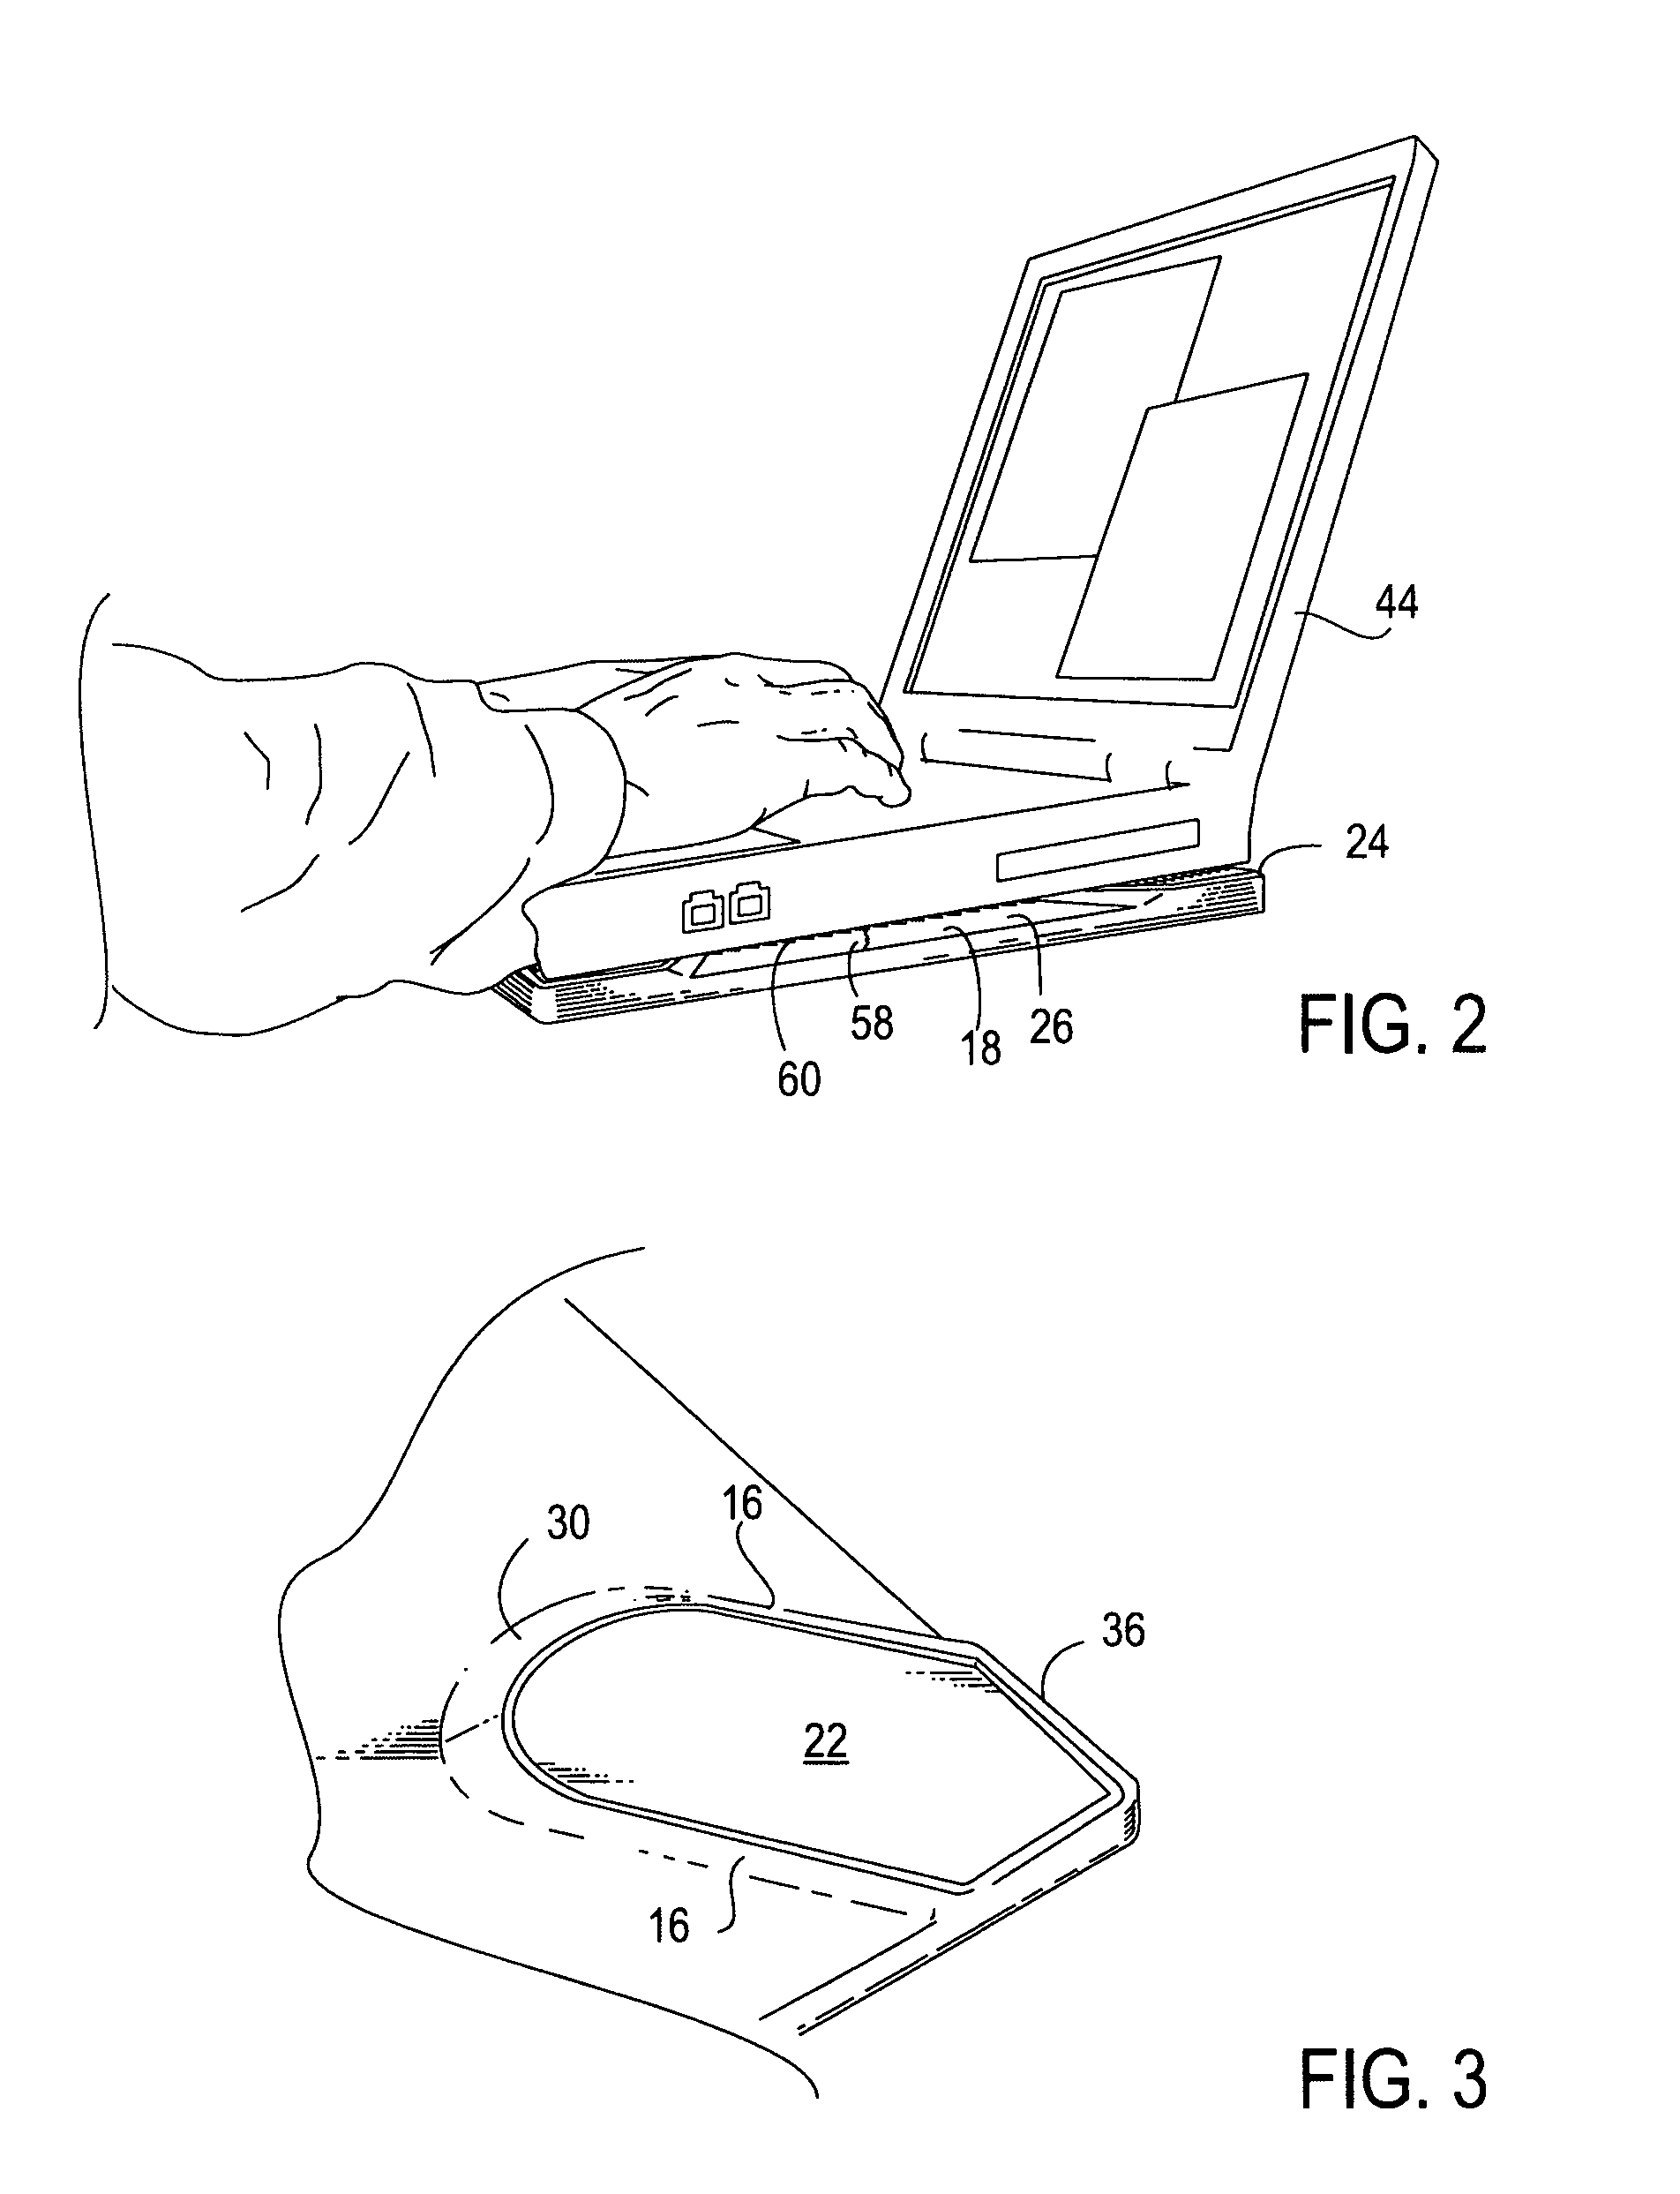 Thermal insulating board for laptop computers